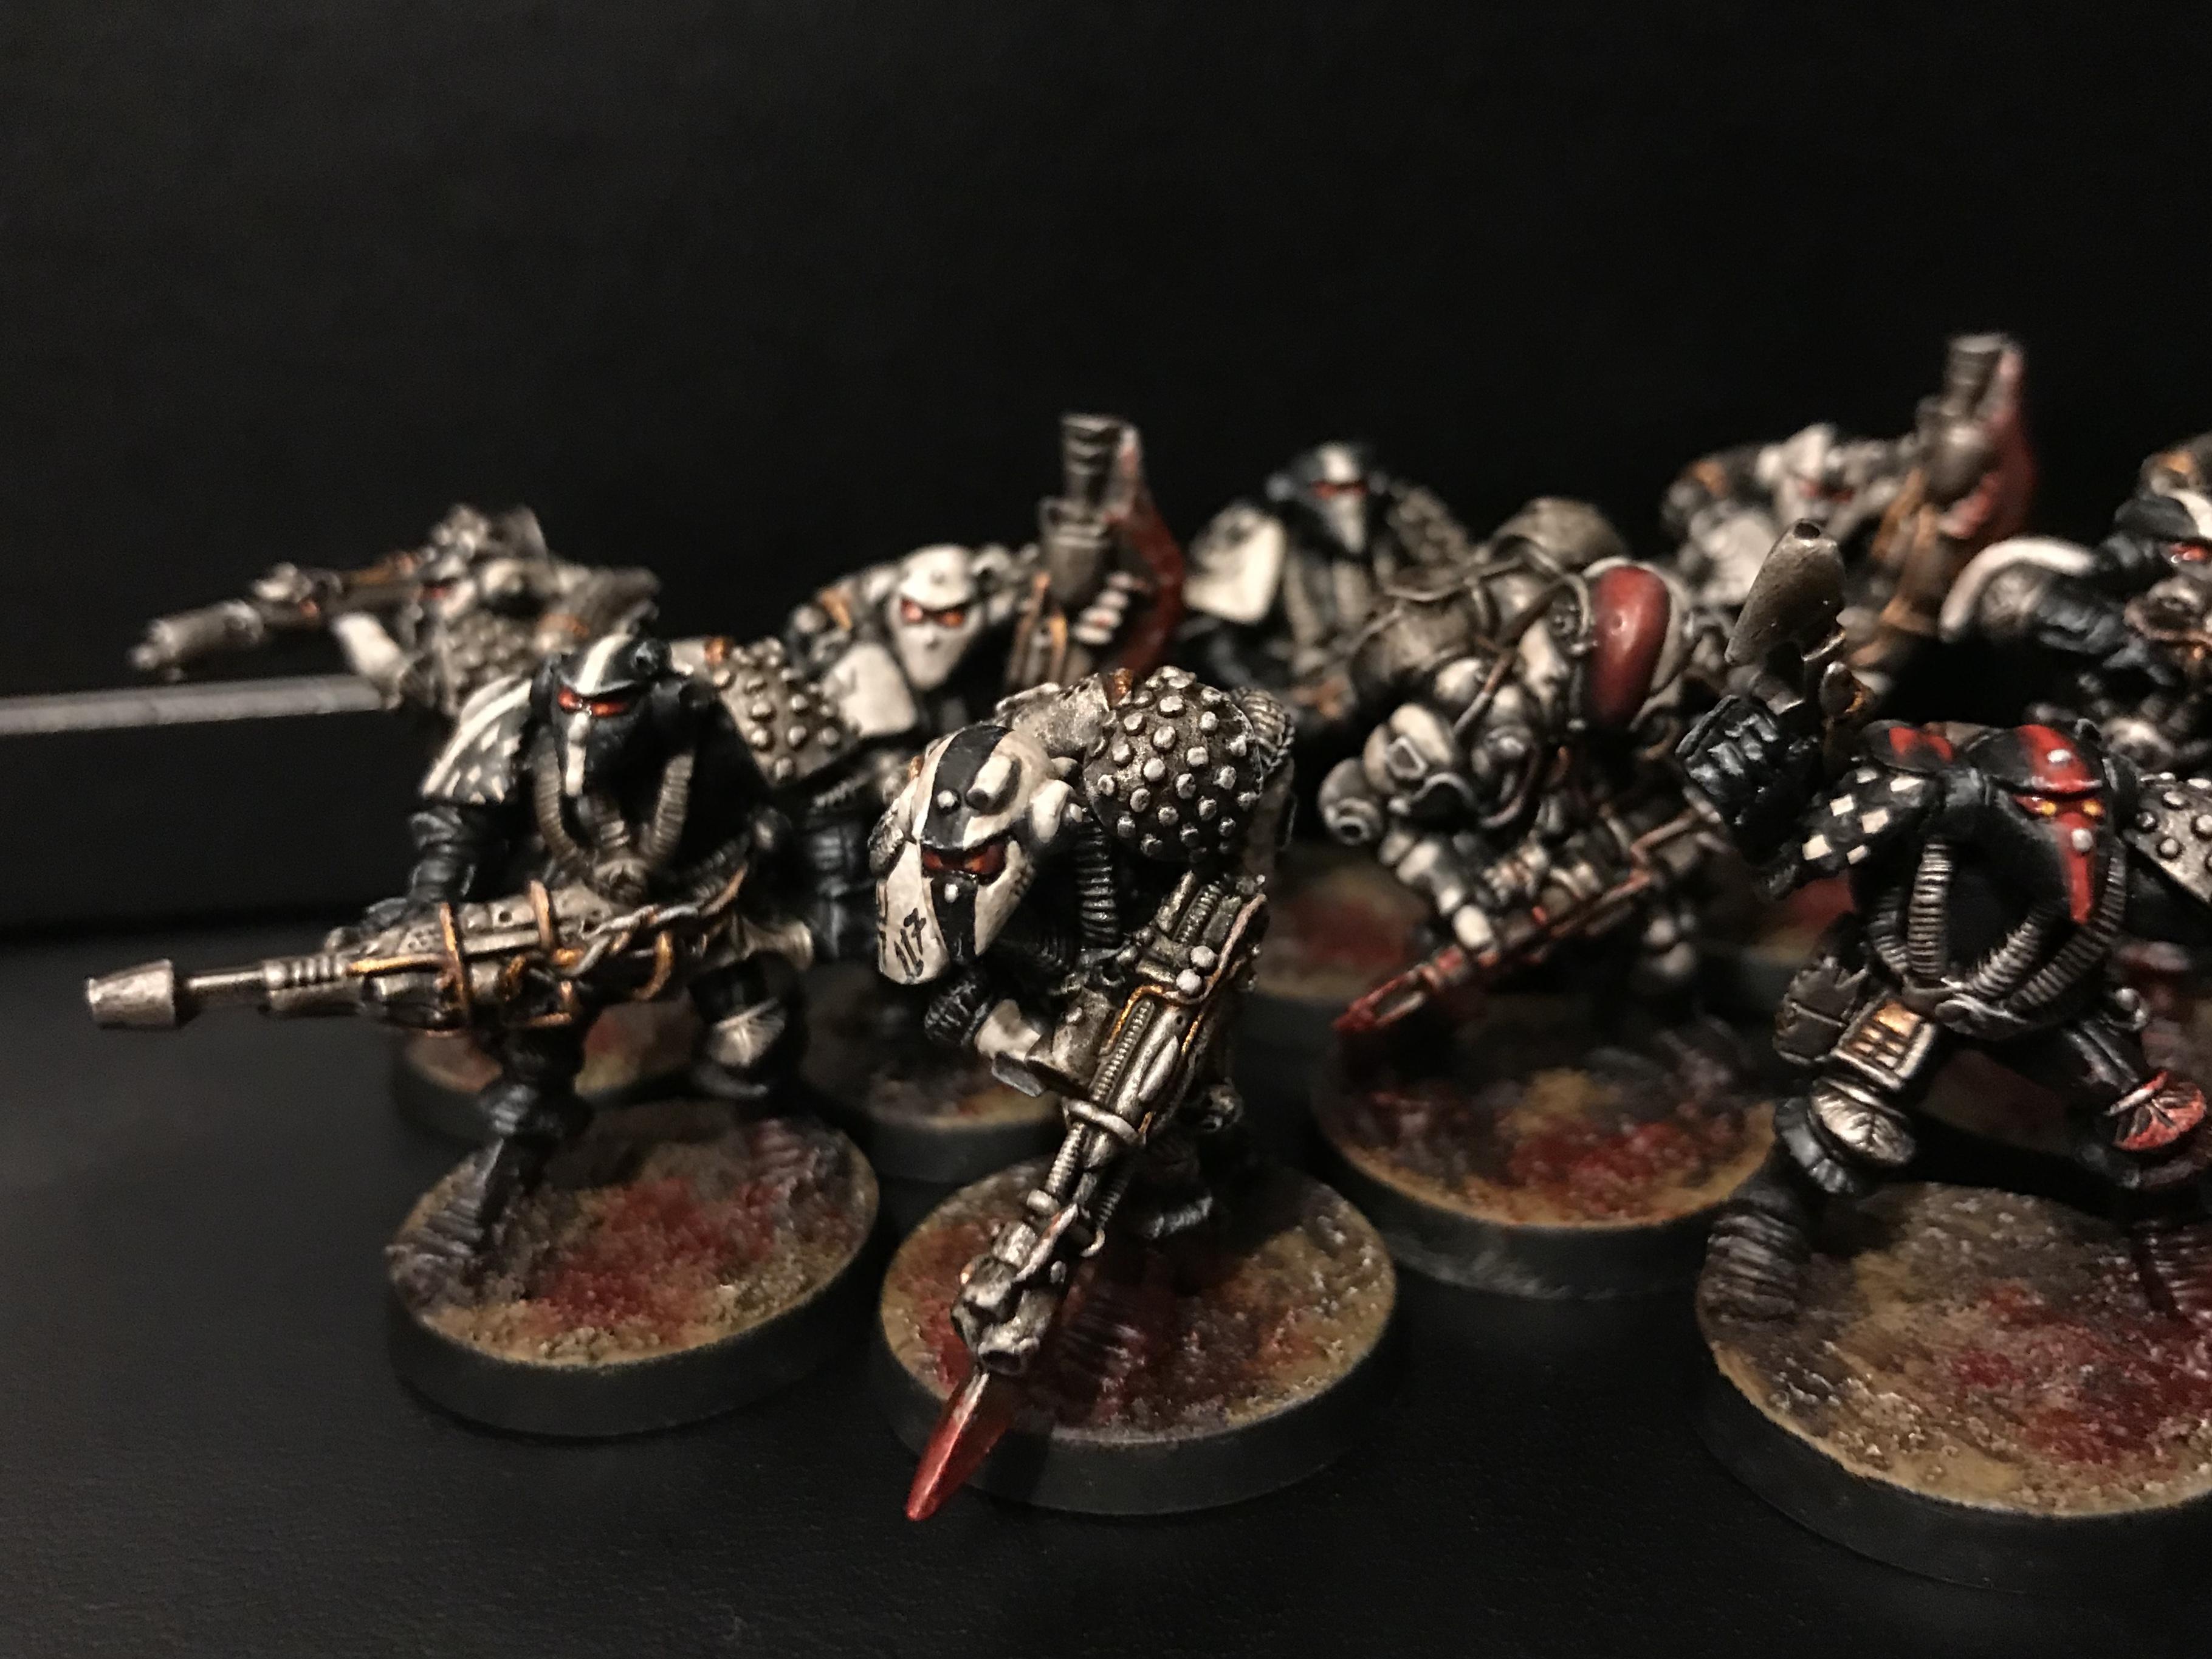 117, 2nd, 41st, Adeptus, And, Armor, Astartes, Badab, Battle, Black, Blade, Bolters, Boltguns, Brother, Brothers, Brutal, C100, Captain, Chaos, Chaotic, Chapter, Chapters, Combi, Combi-bolter, Combi-disintegrator, Combi-weapon, Corsairs, Damned, Dark, Darkness, Deep, Disintegrator, Eye, Far, Fj, Founding, Future, Gate, God, Gods, Grim, Heavy, Heresy, Hobby, Horus, Human, Humans, Imperial, Imperium, Kaos, Kill, Legionaries, Legionnaire, Lost, Malal, Malice, Man, Mankind, Millennium, Of, Oldhammer, Painted, Pirates, Power, Power Armor, Power Armored, Powers, Pyro, Pyromaniac, Raiders, Realms, Recon, Red, Reference, Renegade, Renegades, Retro, Rogue, Ruinous, Runner, Second, Shadow, Slaves, Soldier, Space, Space Marines, Spartan, Spider, Spiders, Squad, Successor, Survivors, Tannh&auml;user, Tannhauser, Team, Teams, Terror, To, Trader, Traders, Traitor, Trooper, Troopers, Troops, Unit, Veteran, Void, War, Warhammer 40,000, Warhammer Fantasy, Warp, Weapon, White, Widow